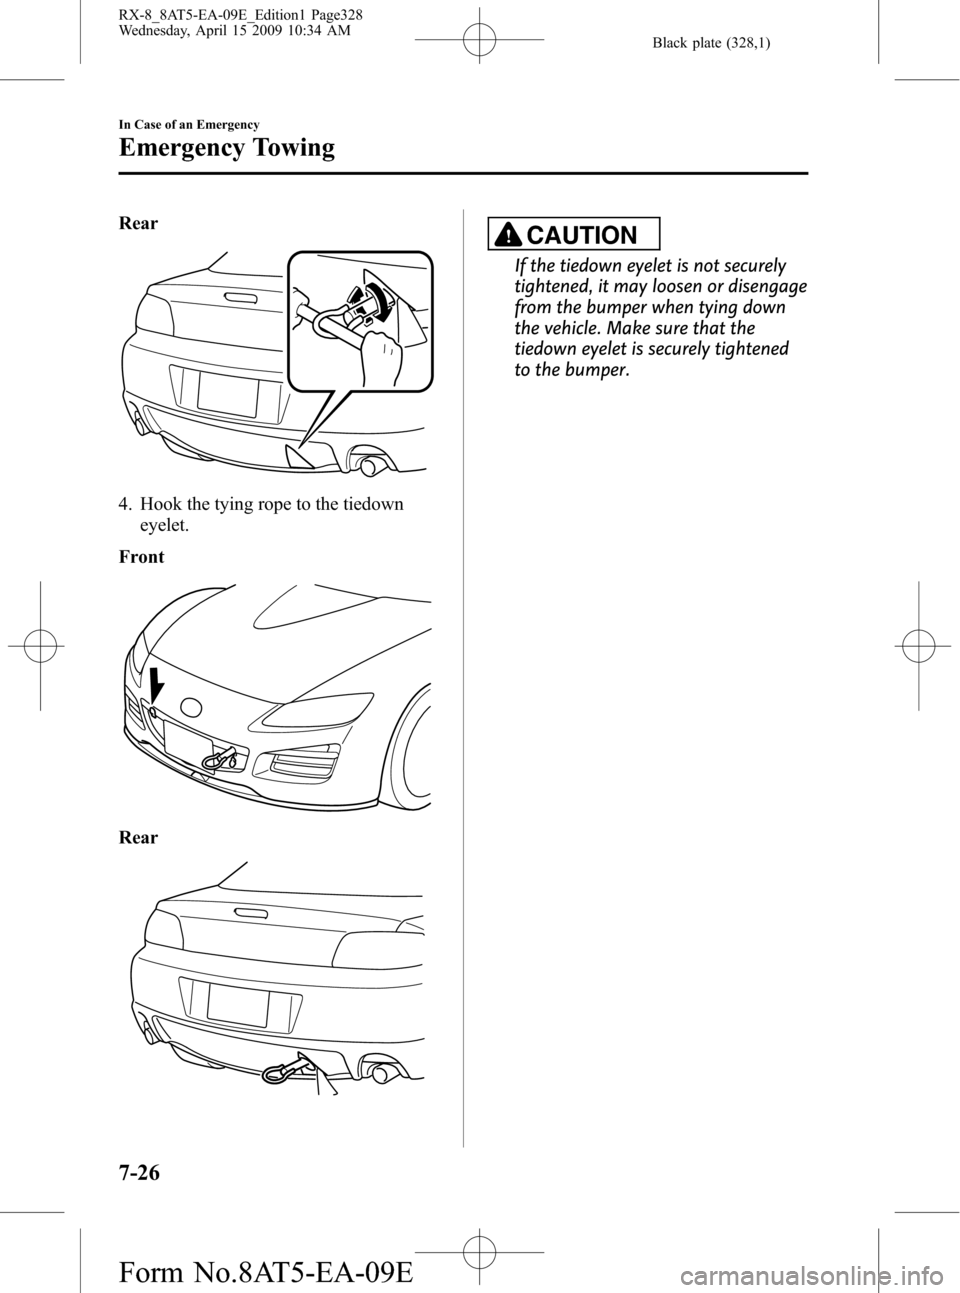 MAZDA MODEL RX 8 2010  Owners Manual (in English) Black plate (328,1)
Rear
4. Hook the tying rope to the tiedown
eyelet.
Front
Rear
CAUTION
If the tiedown eyelet is not securely
tightened, it may loosen or disengage
from the bumper when tying down
th